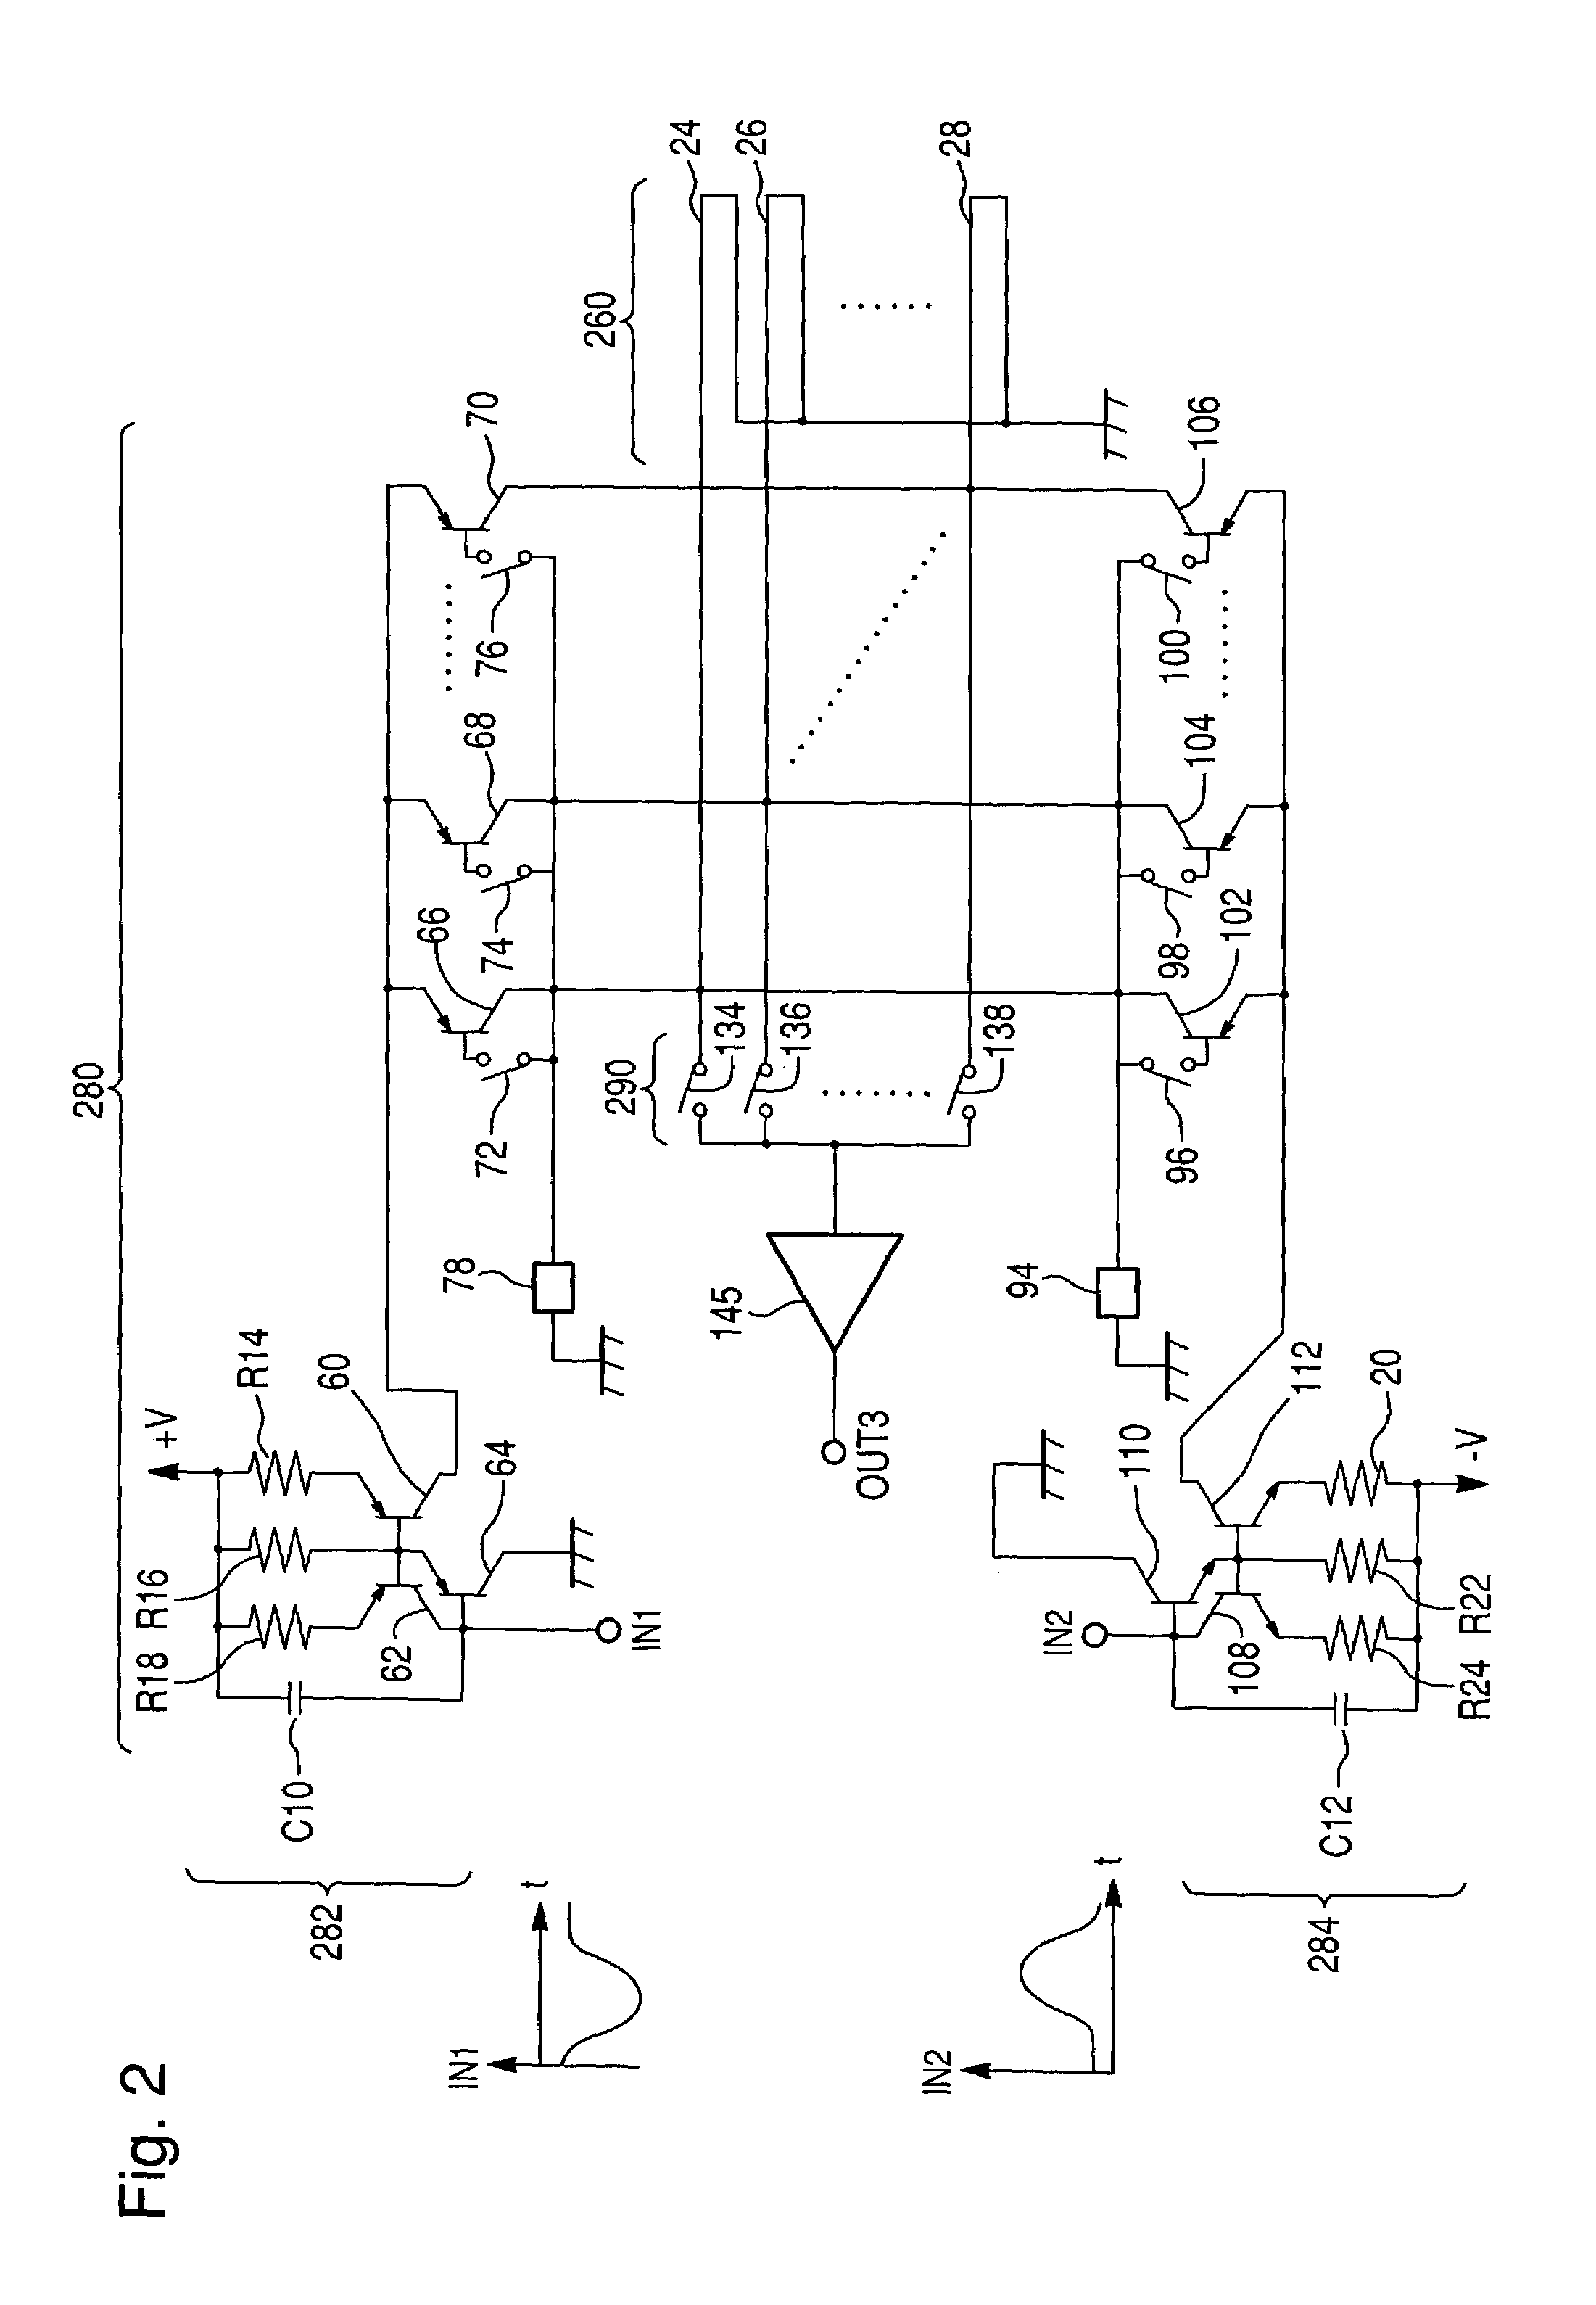 Current feed circuit for sensor coils in coordinate input device